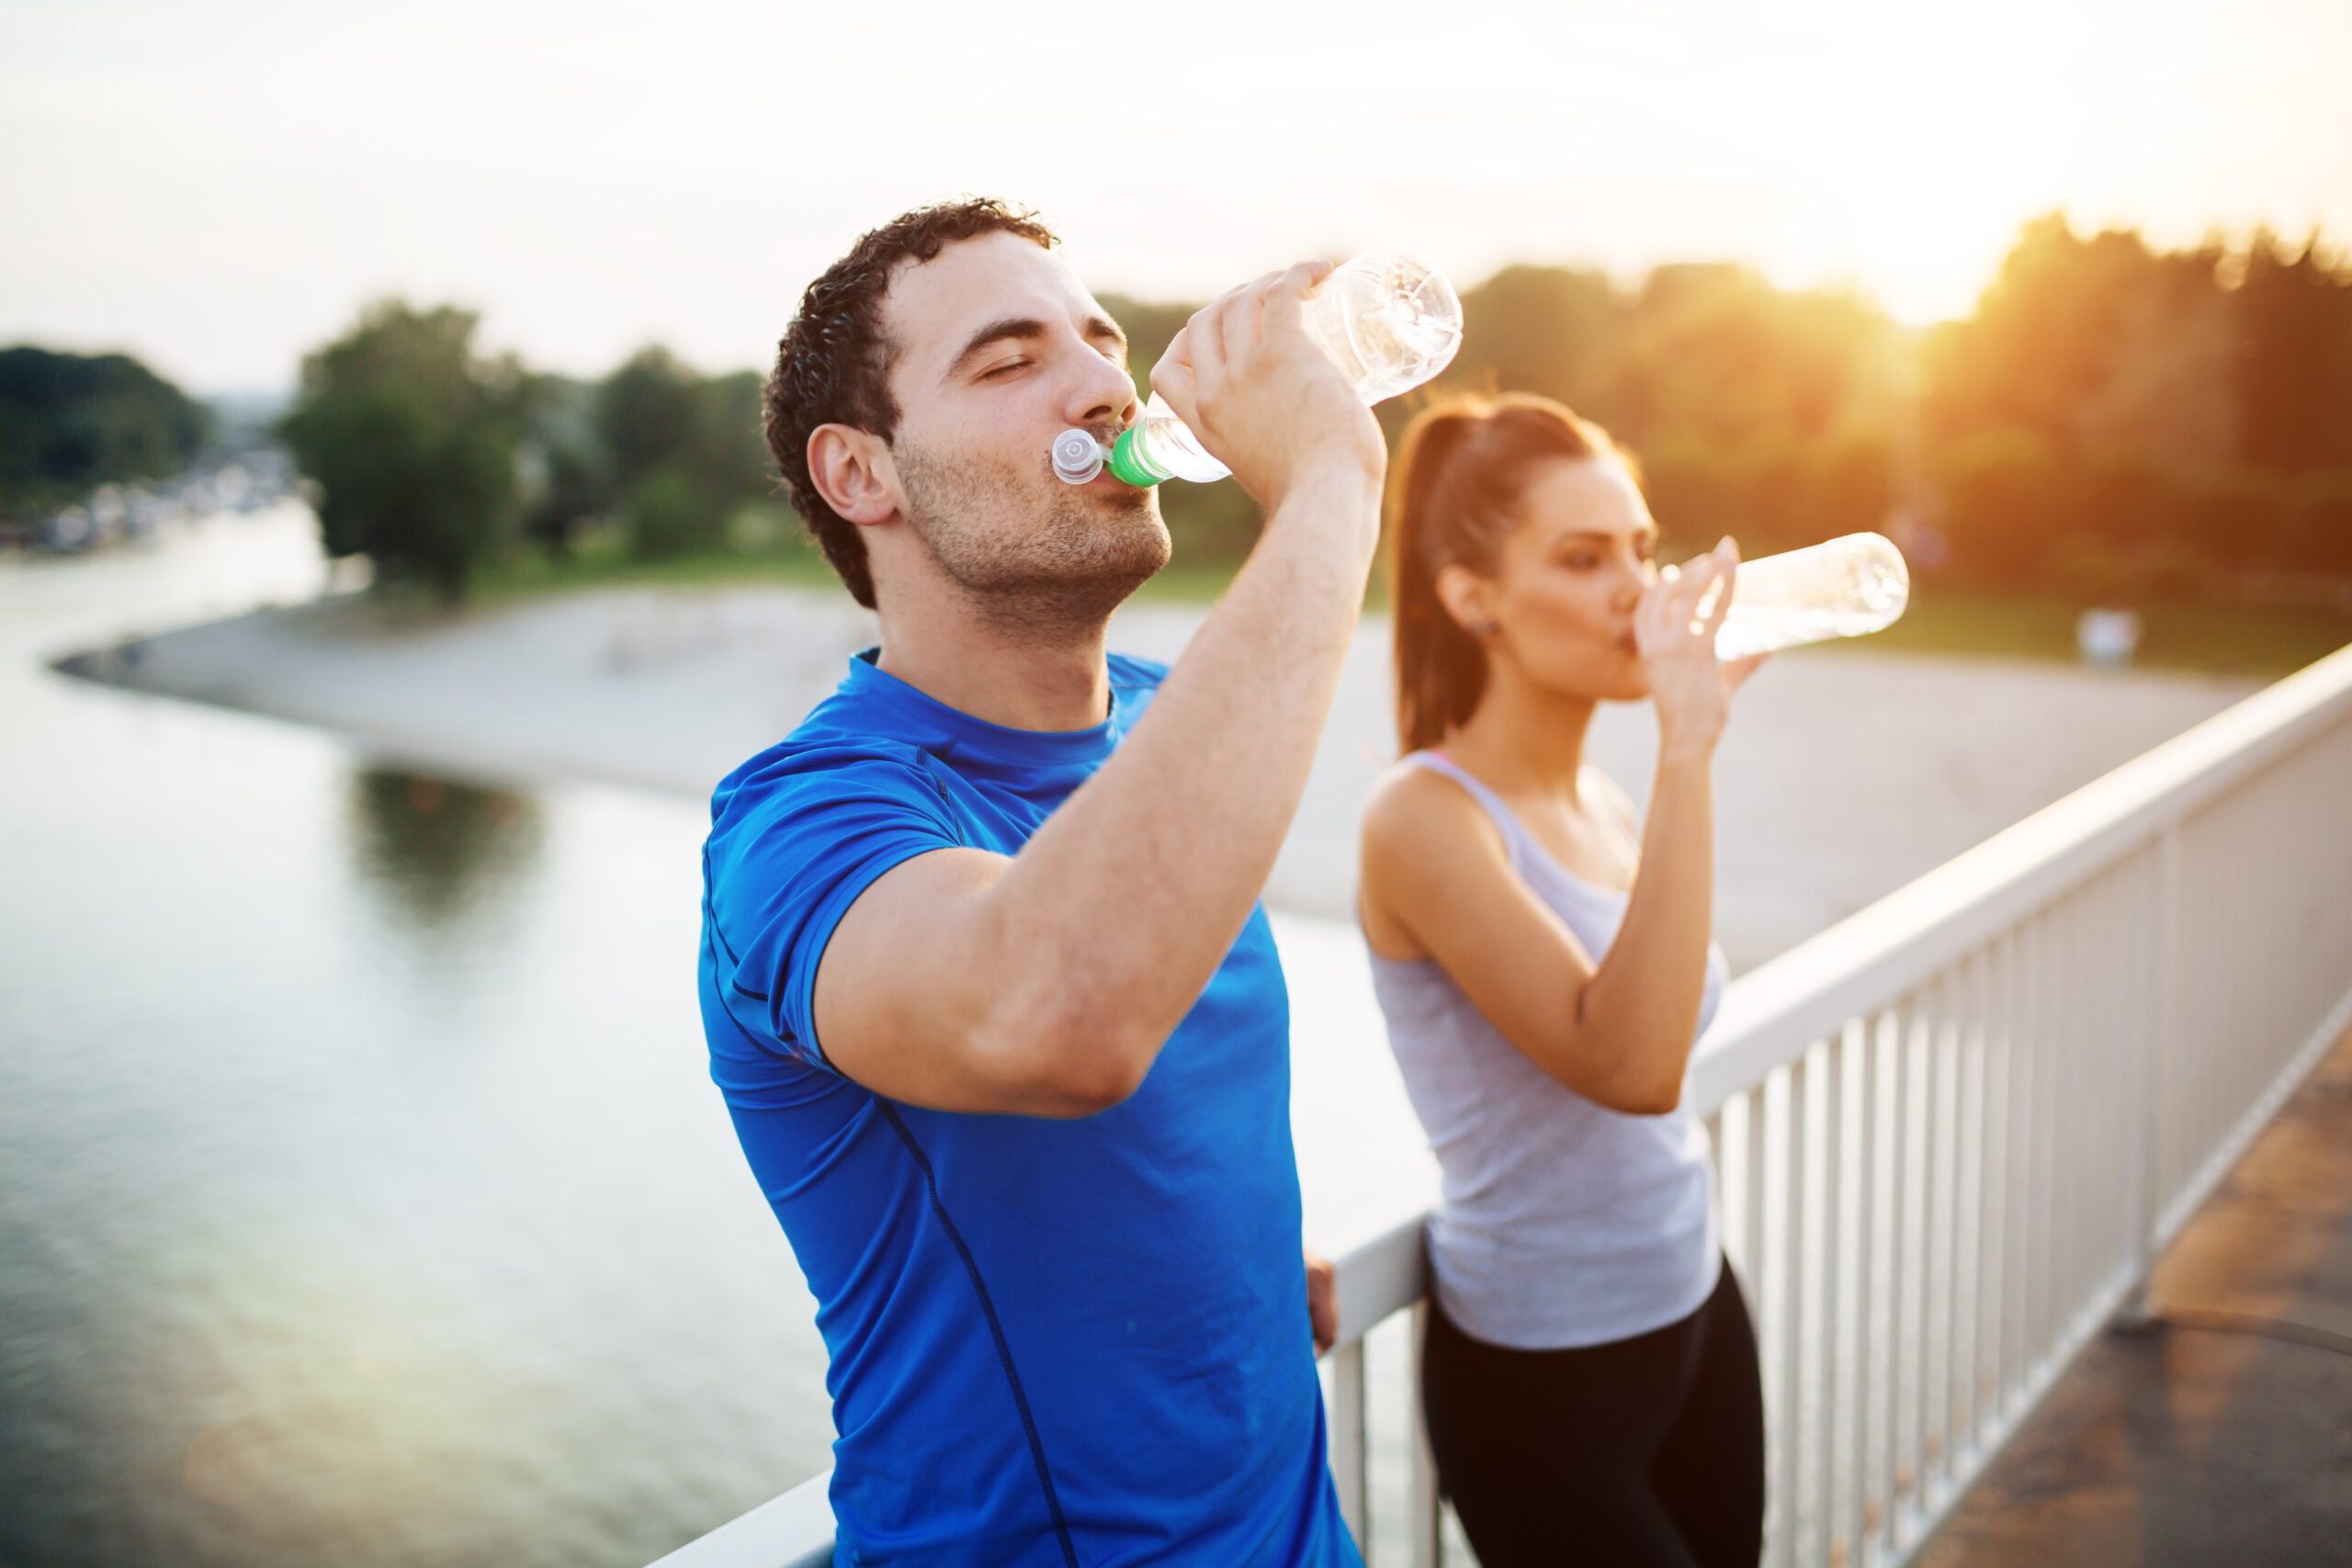 runners hydrating prior to long run